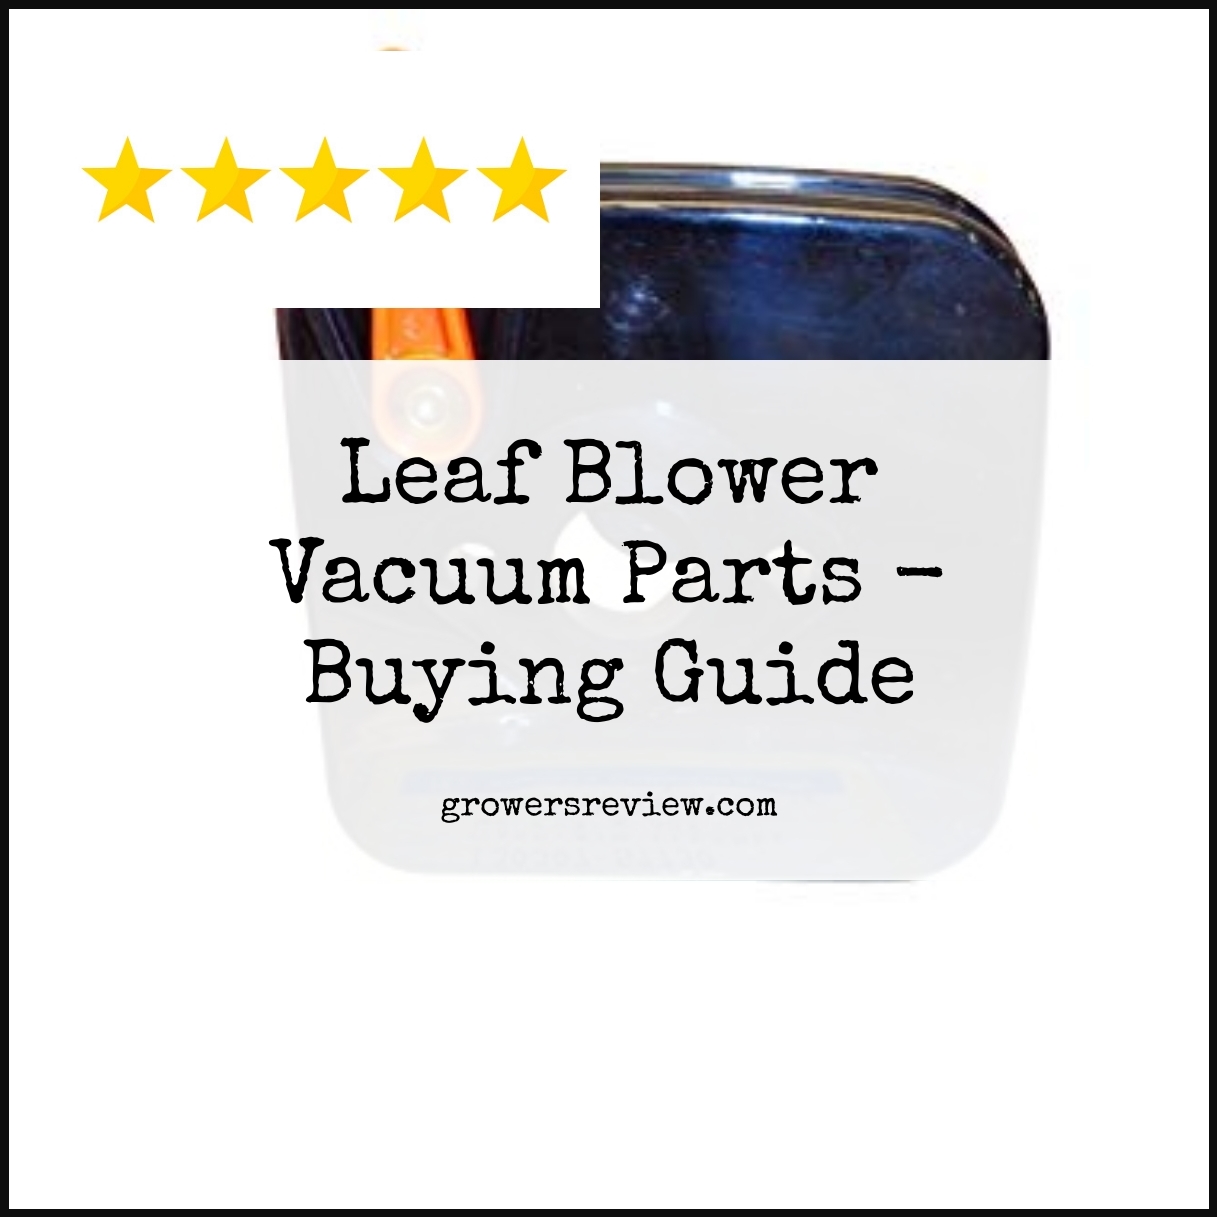 Leaf Blower Vacuum Parts - Buying Guide